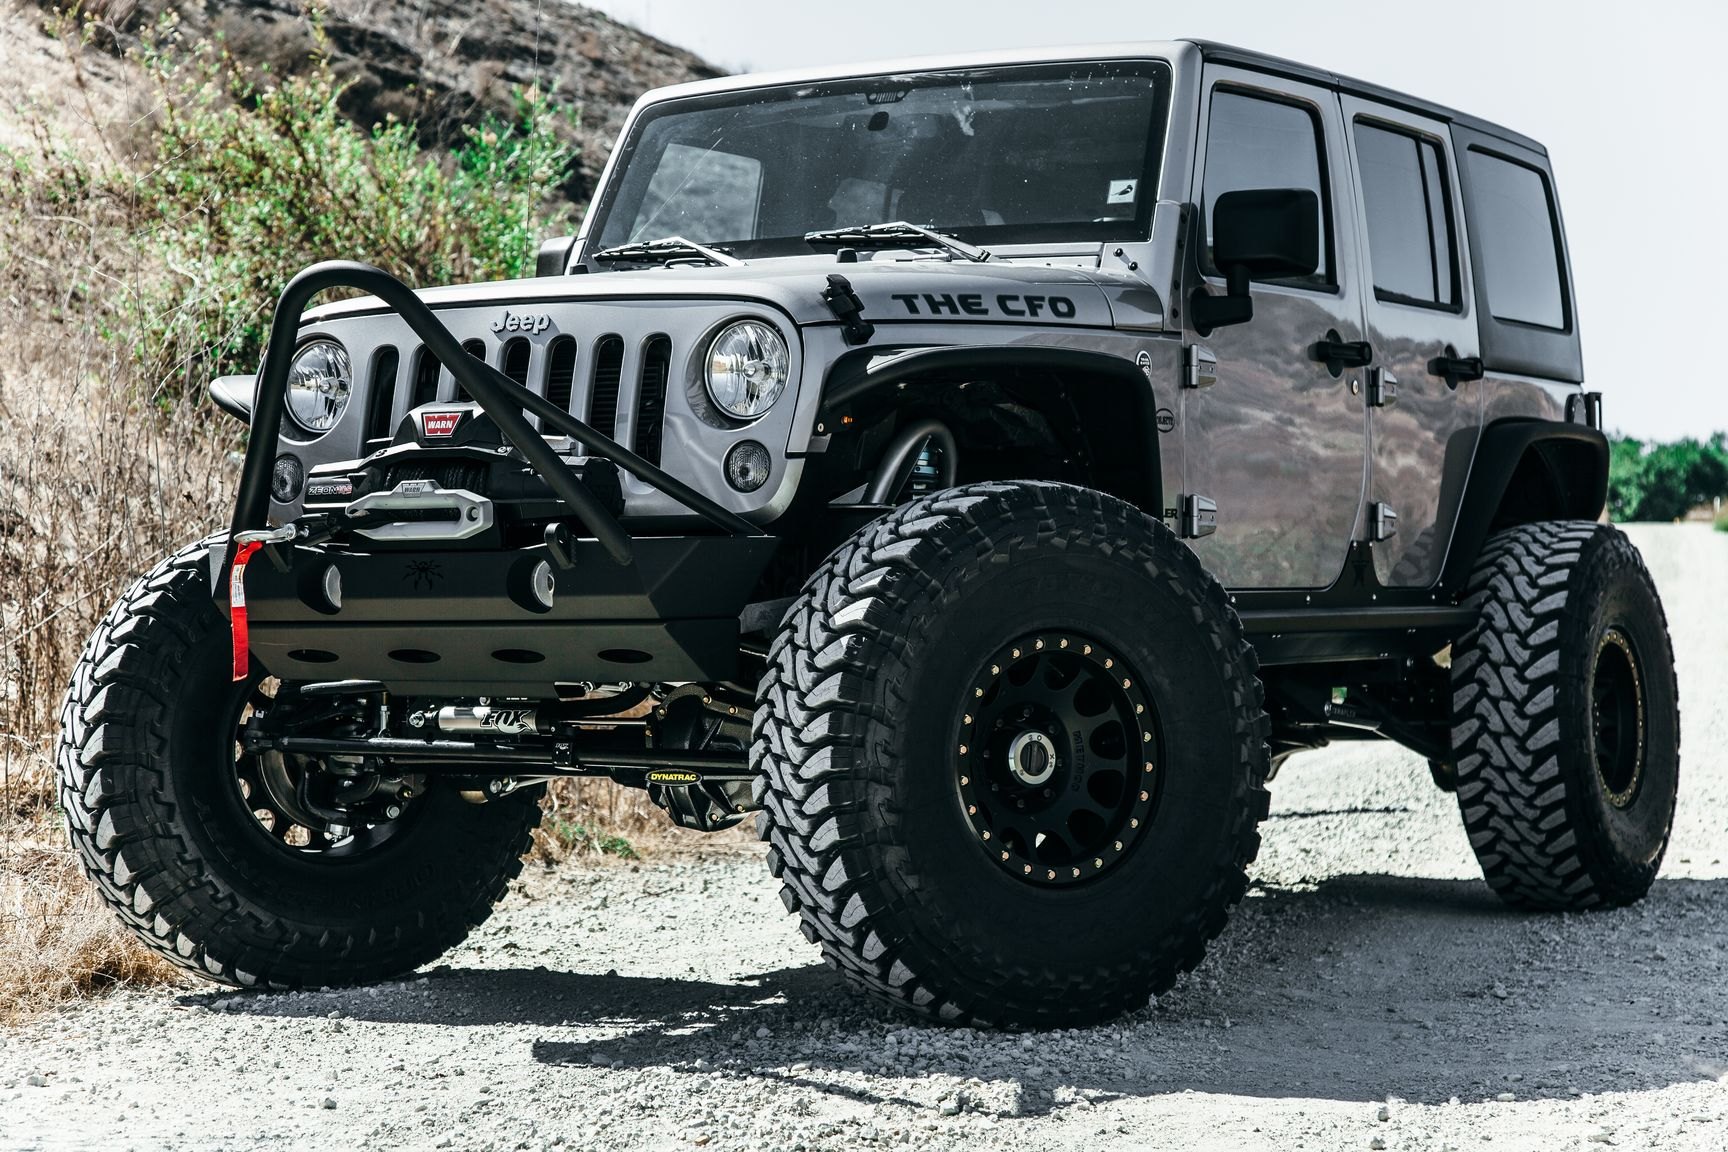 Gray Lifted Jeep Wrangler Fully Loaded With Off Road Custom Accessories